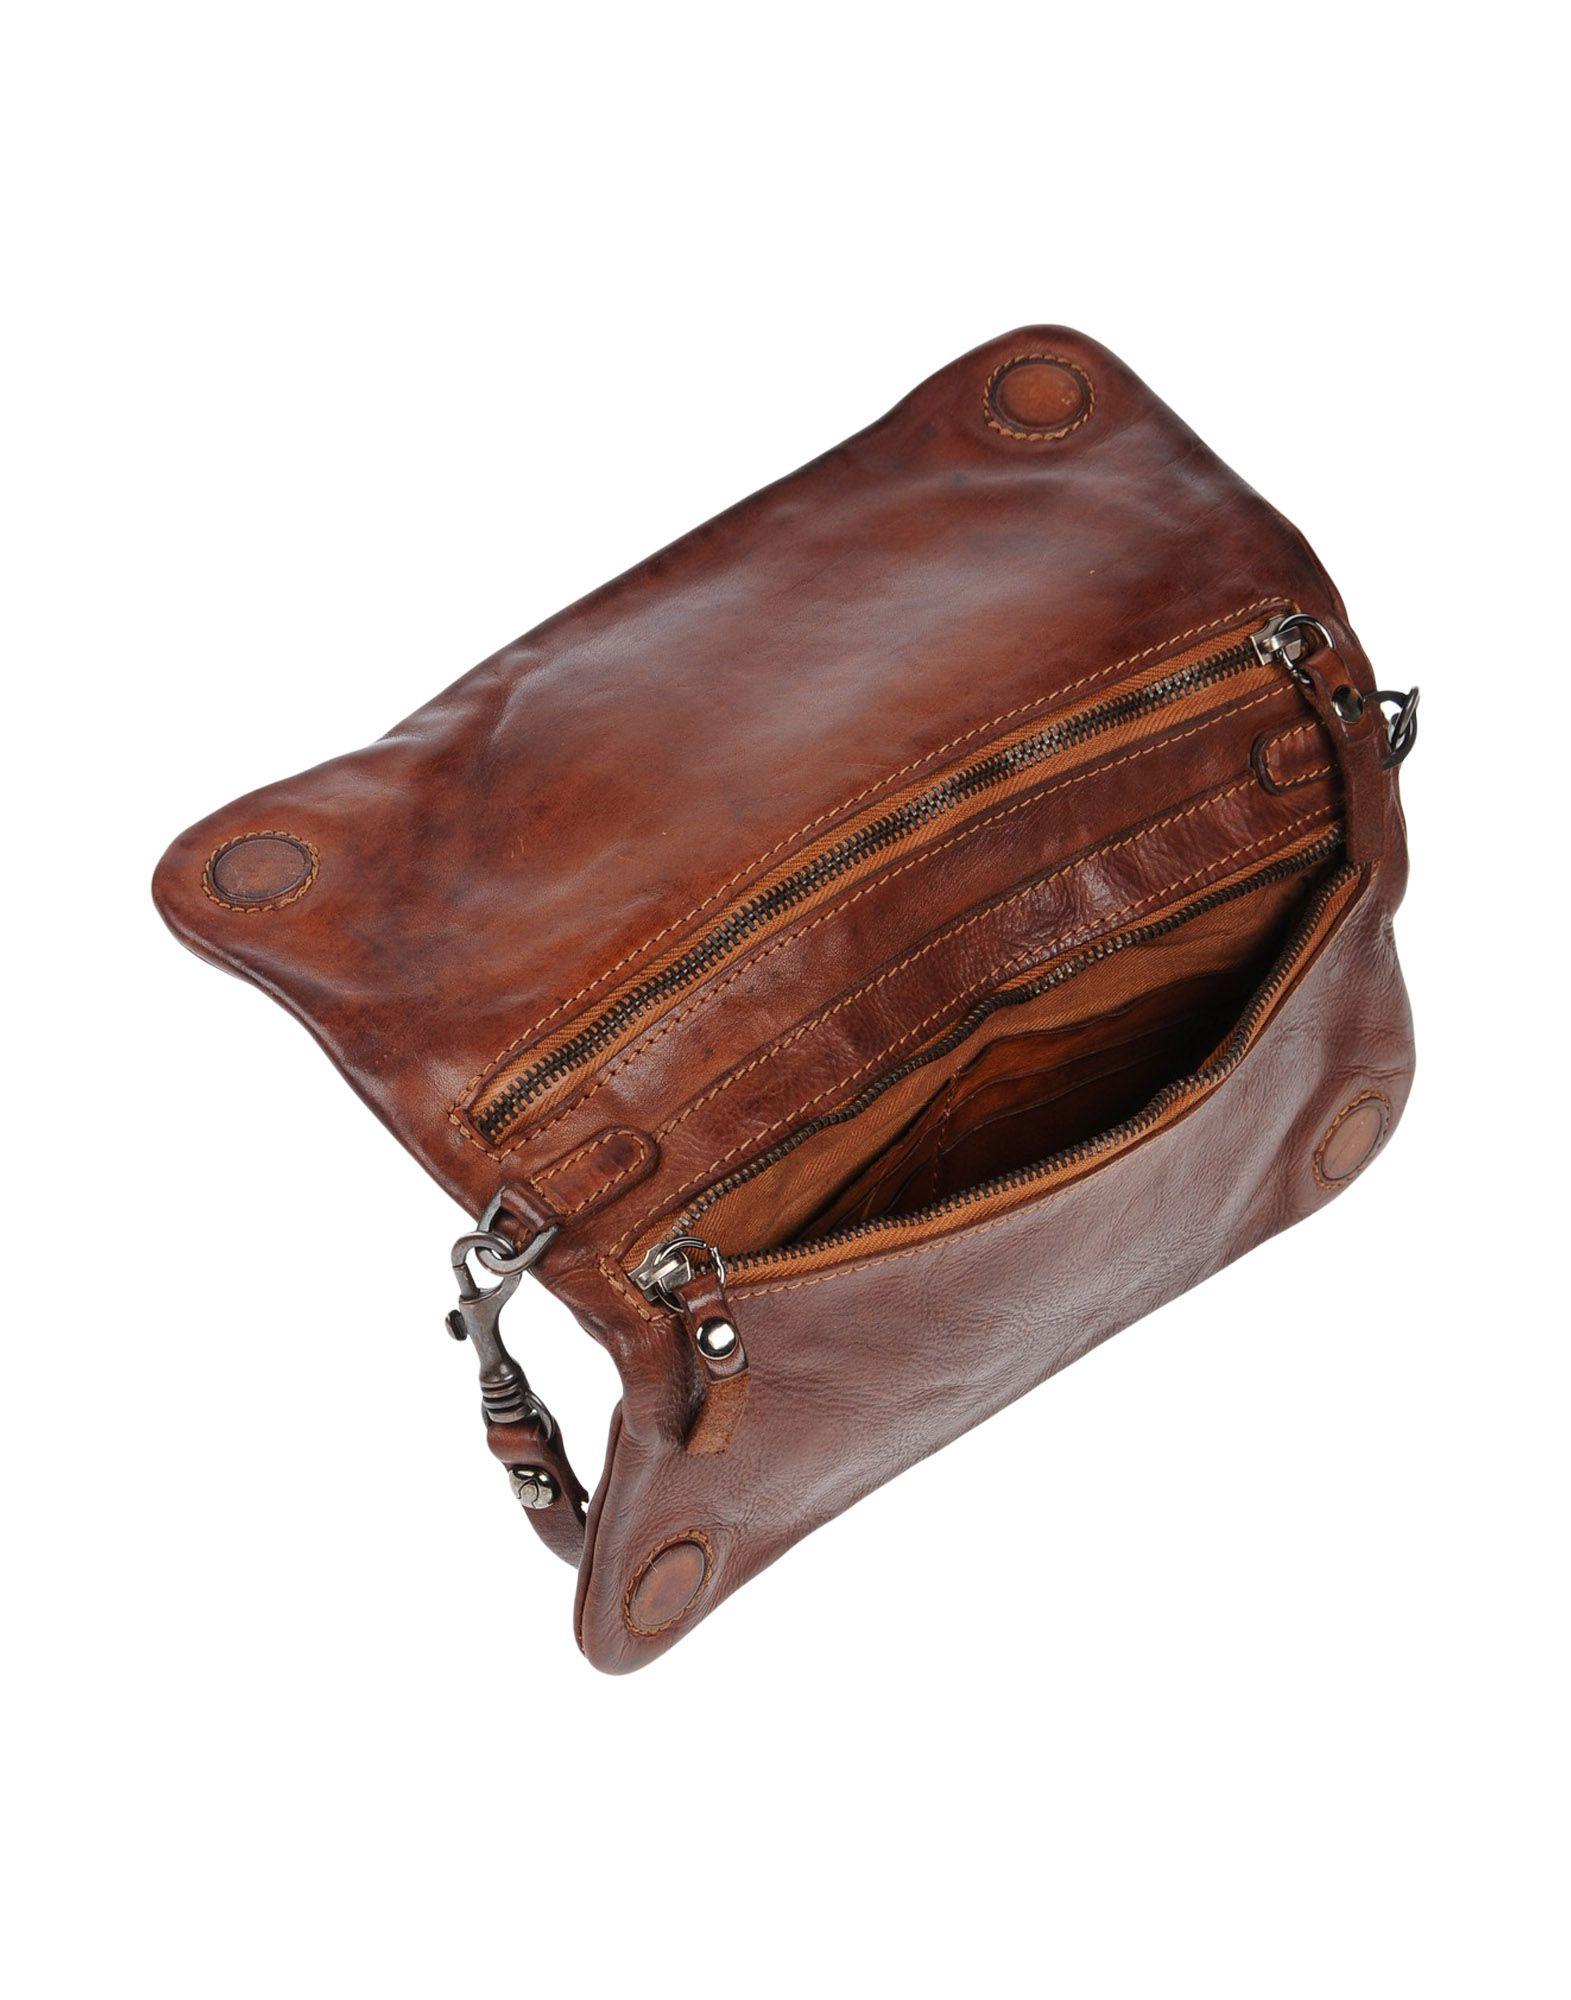 Lyst - Campomaggi Leather Clutch Bag in Brown